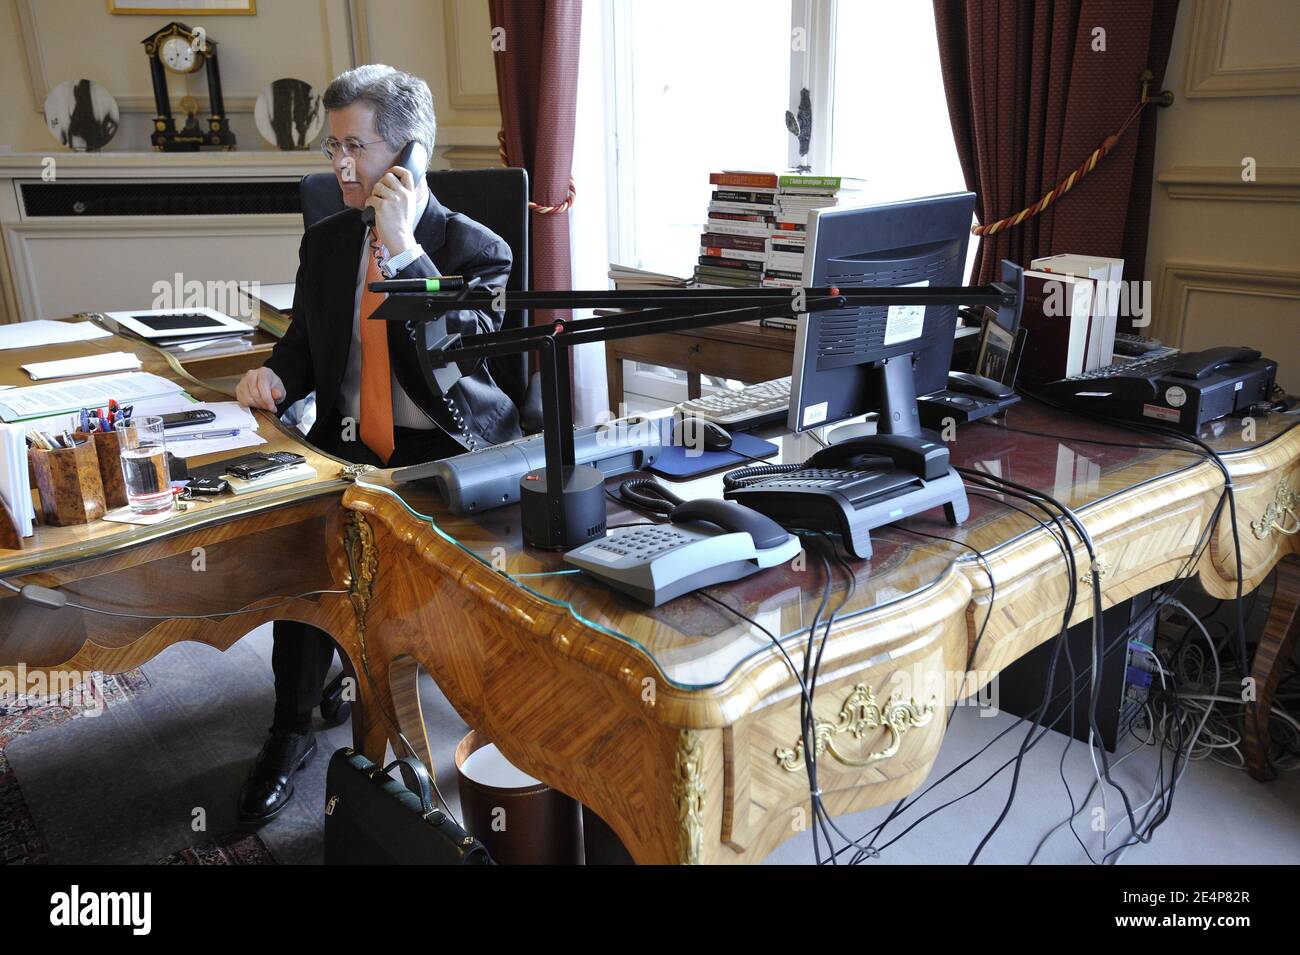 Jean-David Levitte, Diplomatic advisor of President Nicolas Sarkozy, is  pictured in his office at the Elysee Palace in Paris, France on January 22,  2008. Photo by Elodie Gregoire/ABACAPRESS.COM Stock Photo - Alamy